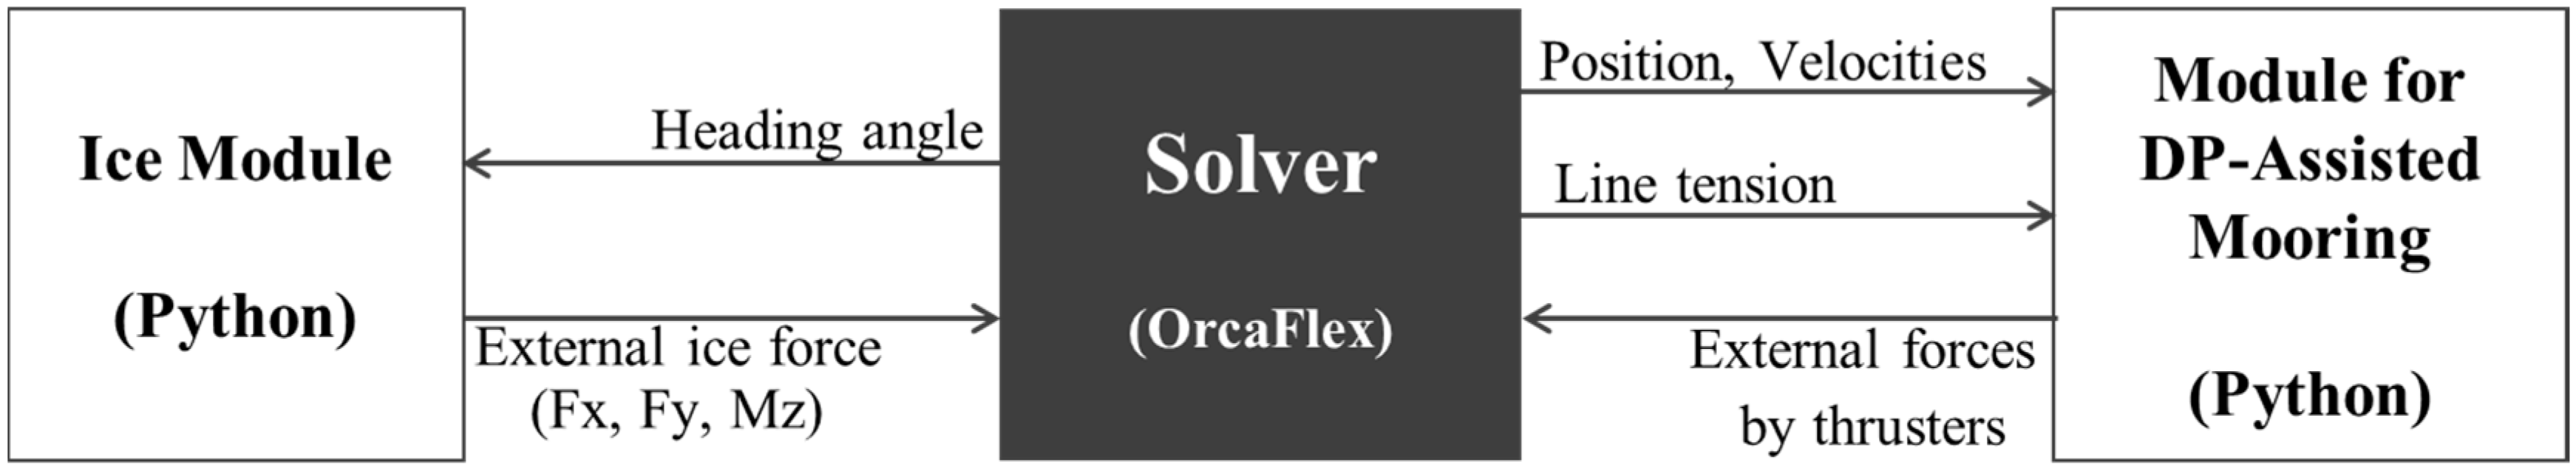 how to calculate damage orcaflex